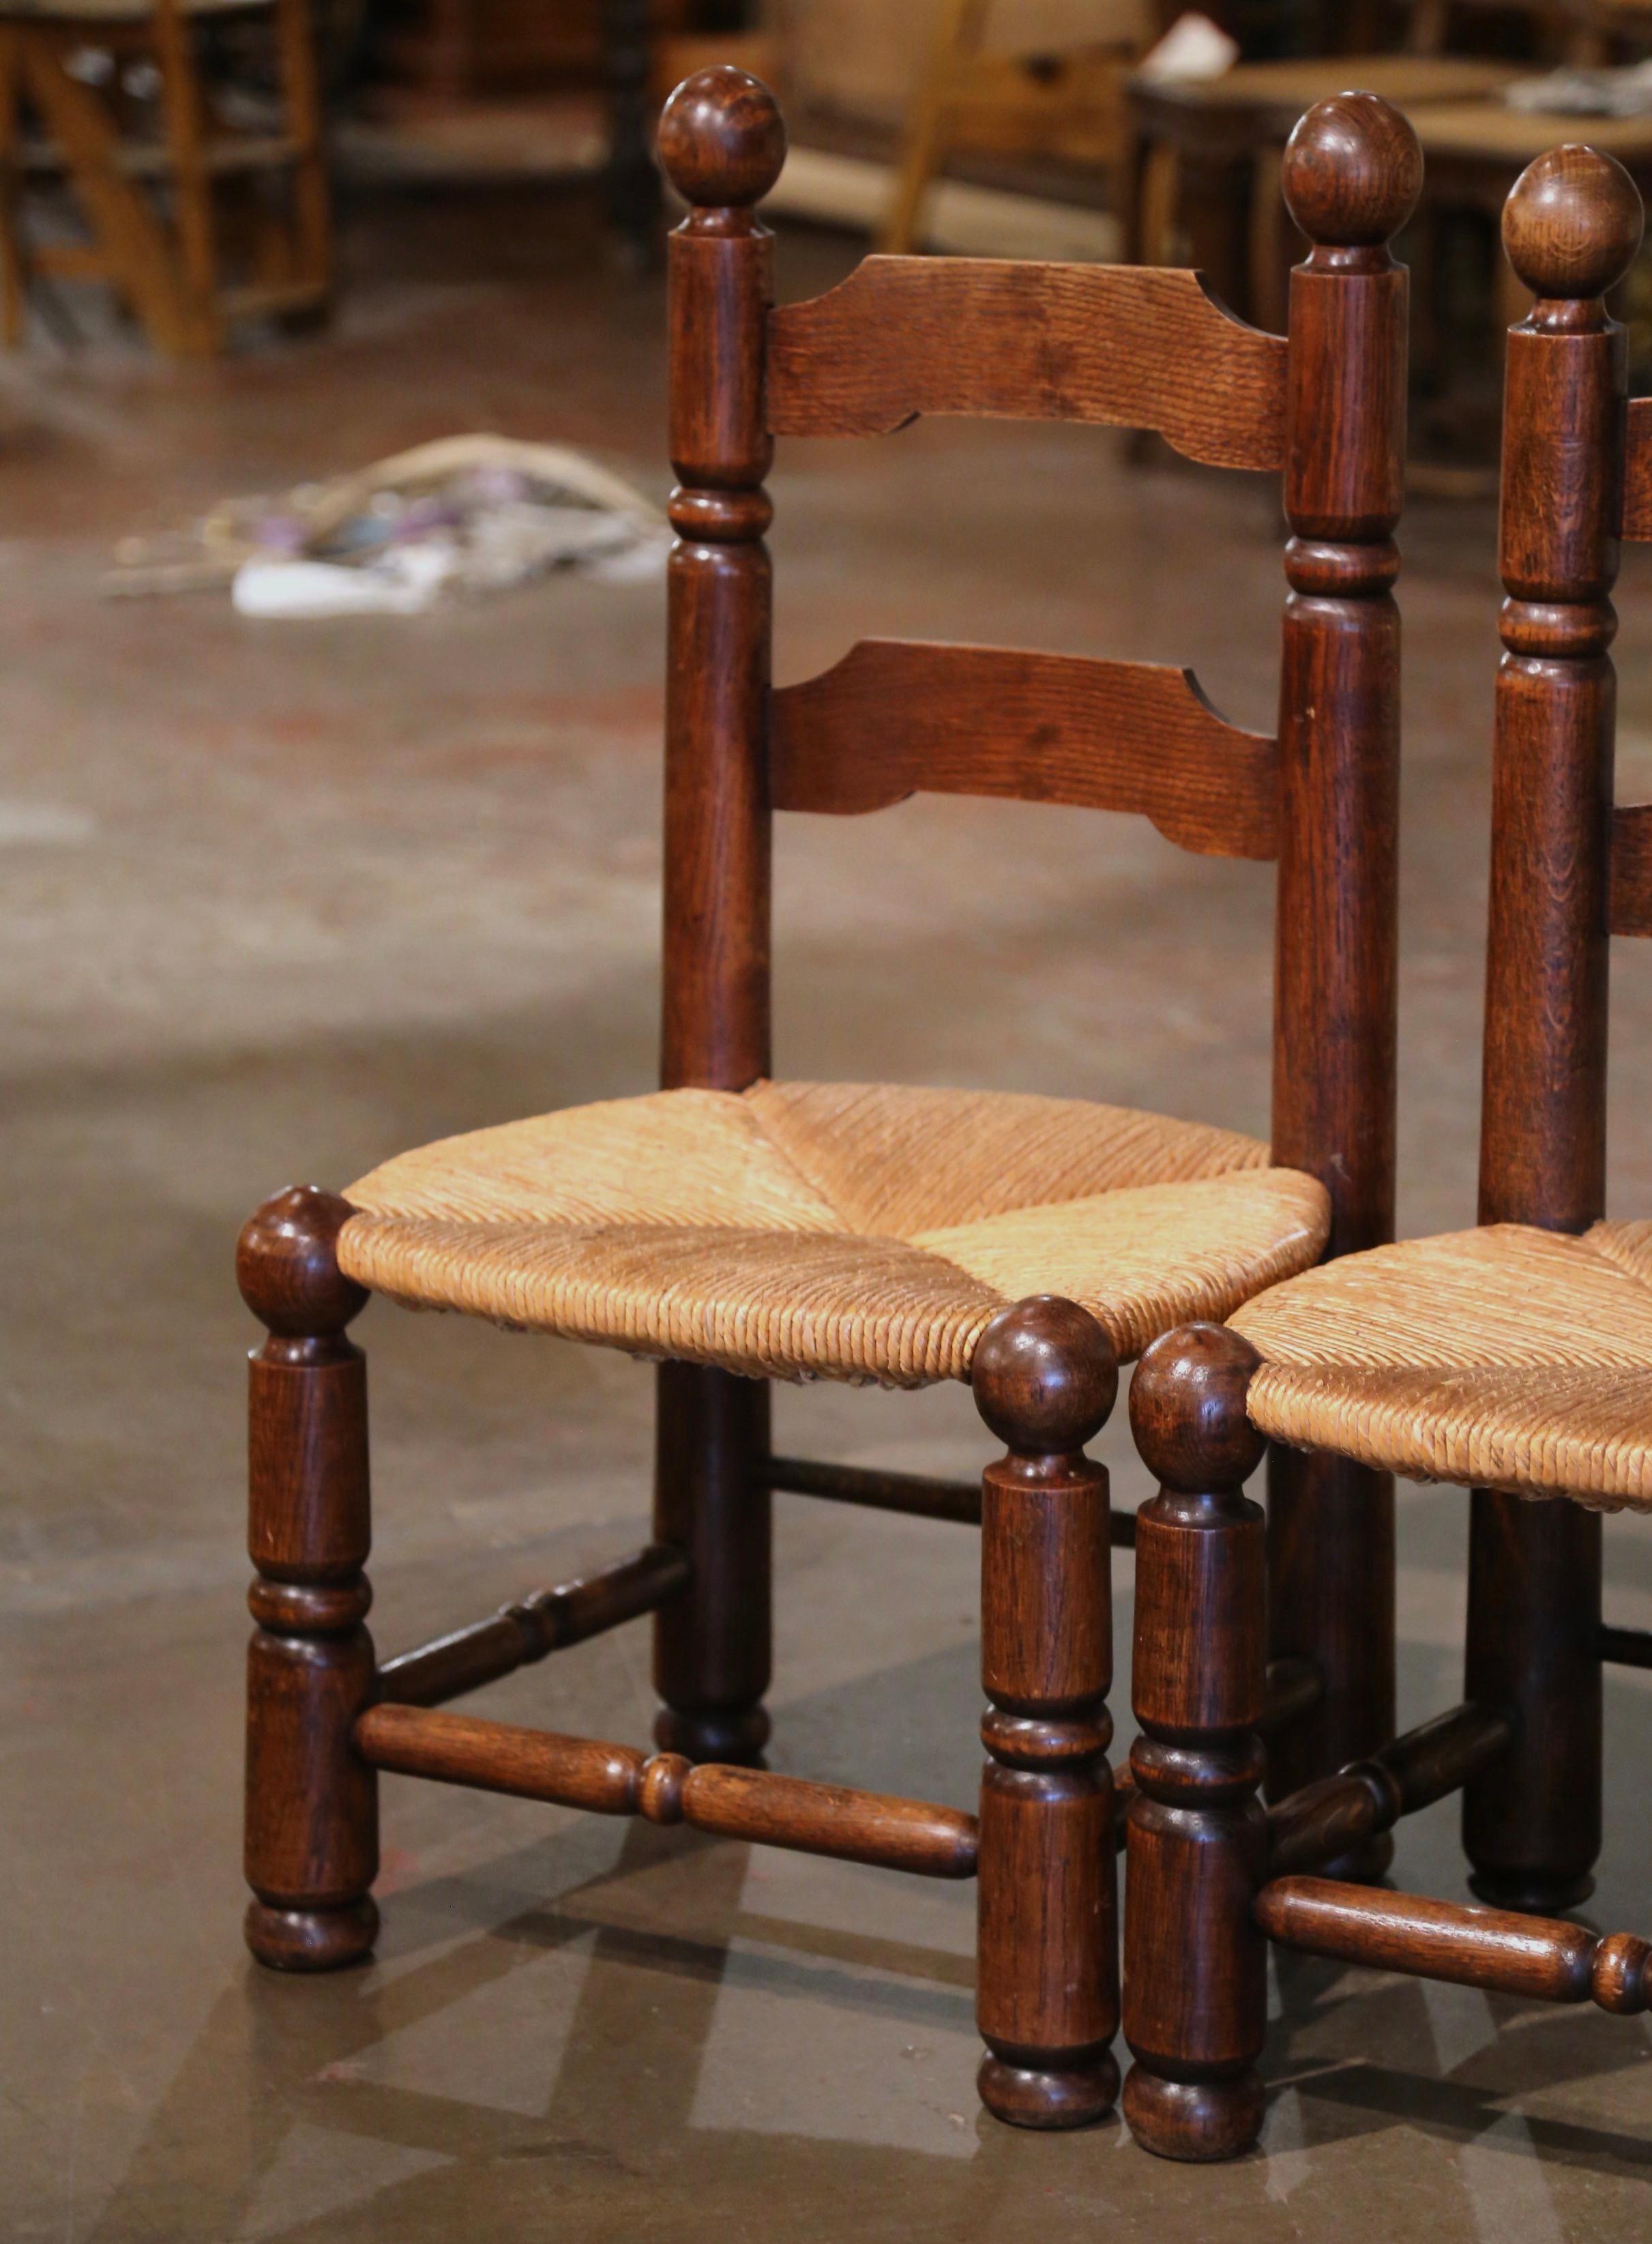 These very comfortable antique ladder back chairs were crafted in Normandy, France circa 1920. Built in walnut and beechwood and attributed to Charles Dudouyt, each chair sits on round turned legs and features two ladders in the back embellished